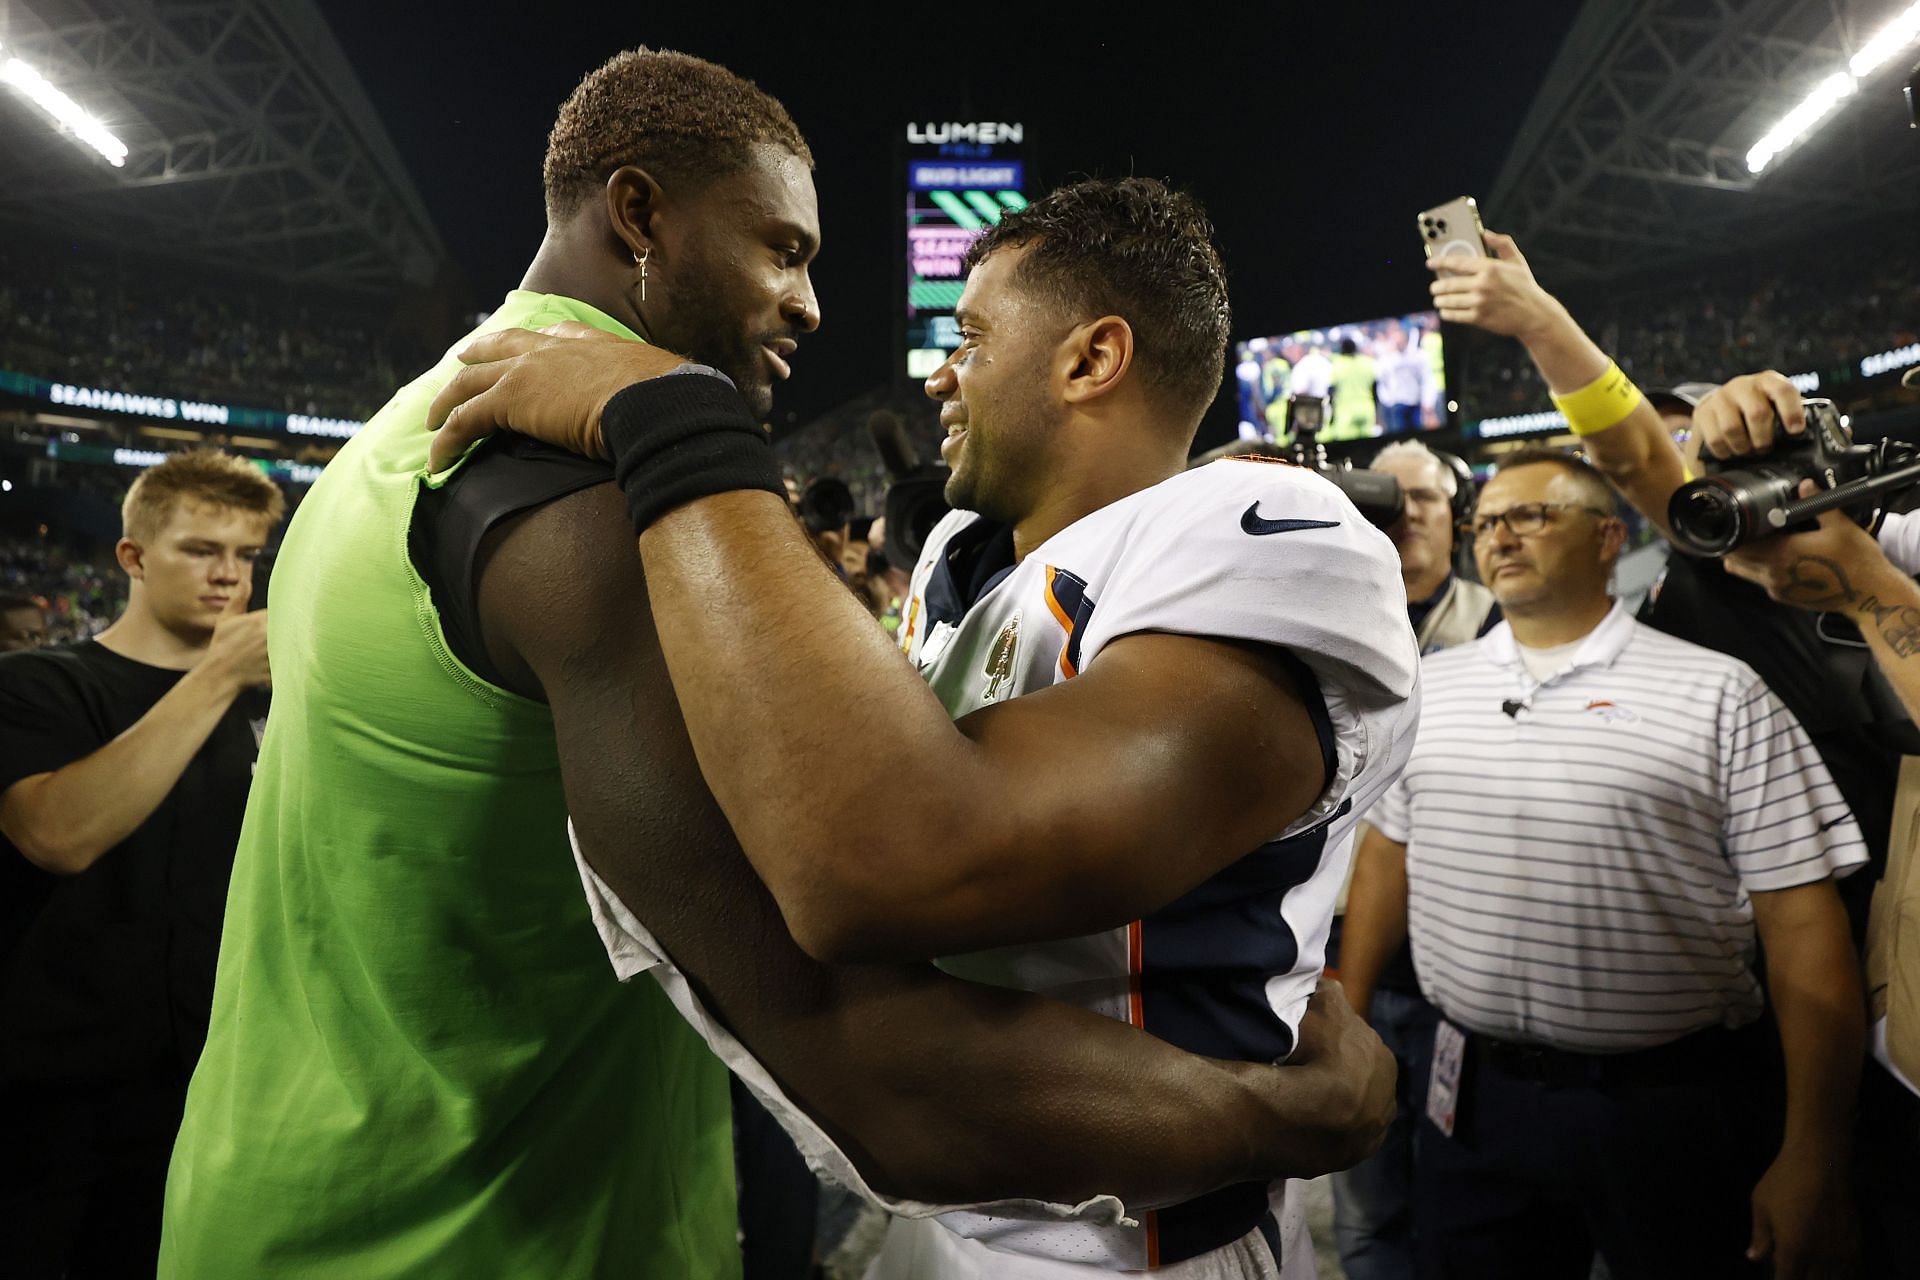 DK Metcalf and Russell Wilson at the Denver Broncos v Seattle Seahawks game